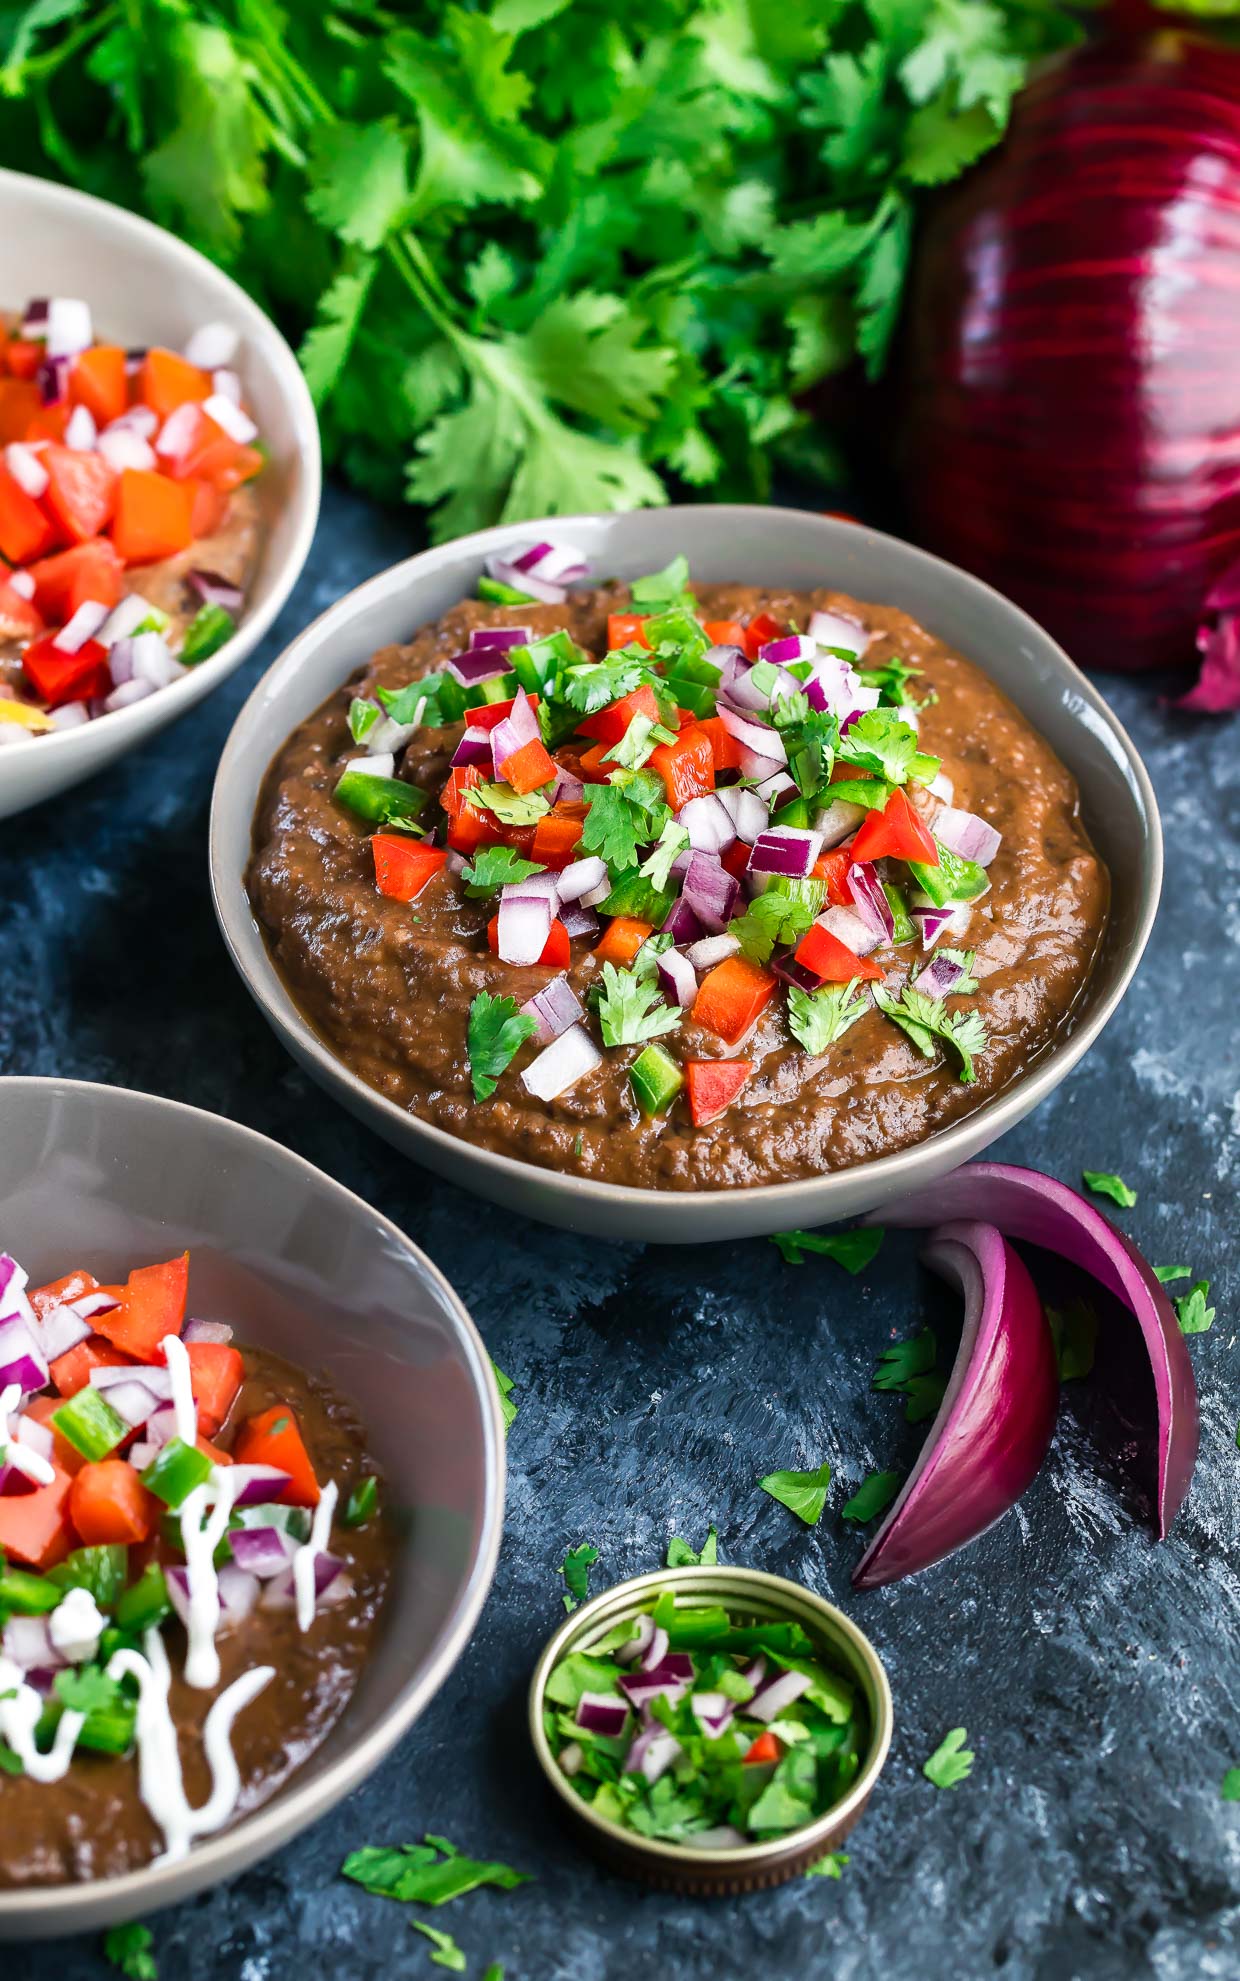 Instant Pot Black Bean Dip is a total breeze to throw together! No cans needed! Simply grab a bag of dried beans and get ready for a party-perfect vegetarian dip that's easy, make-ahead, and SO delicious!